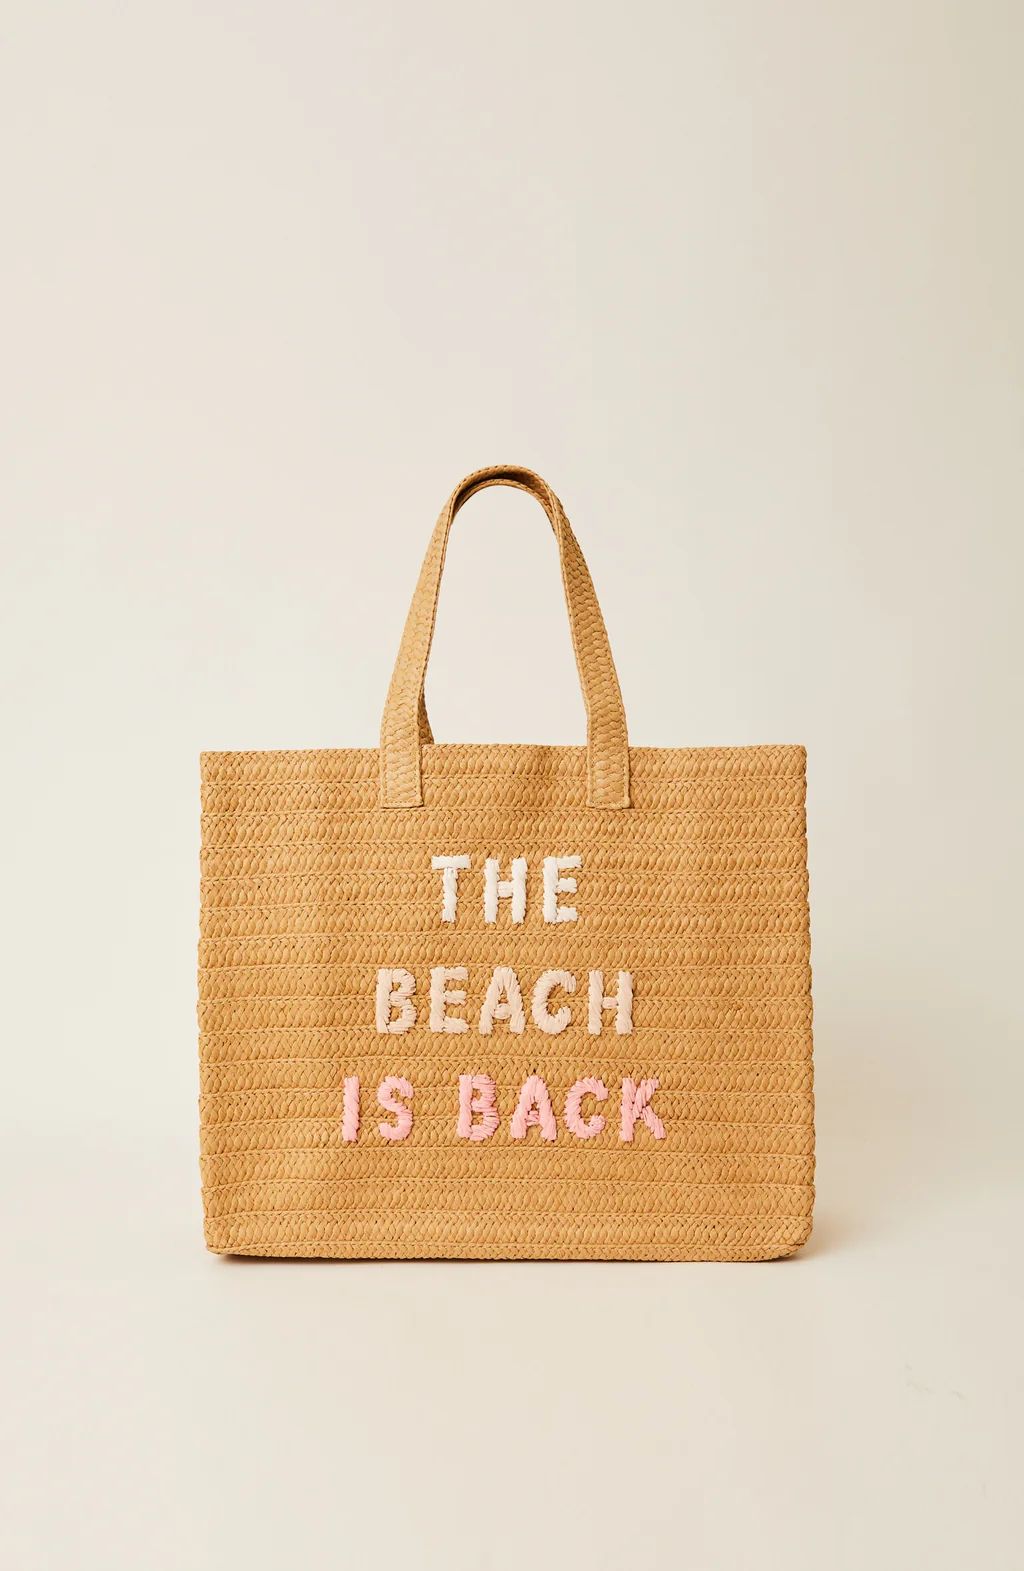 THE BEACH IS BACK TOTE | btb Los Angeles